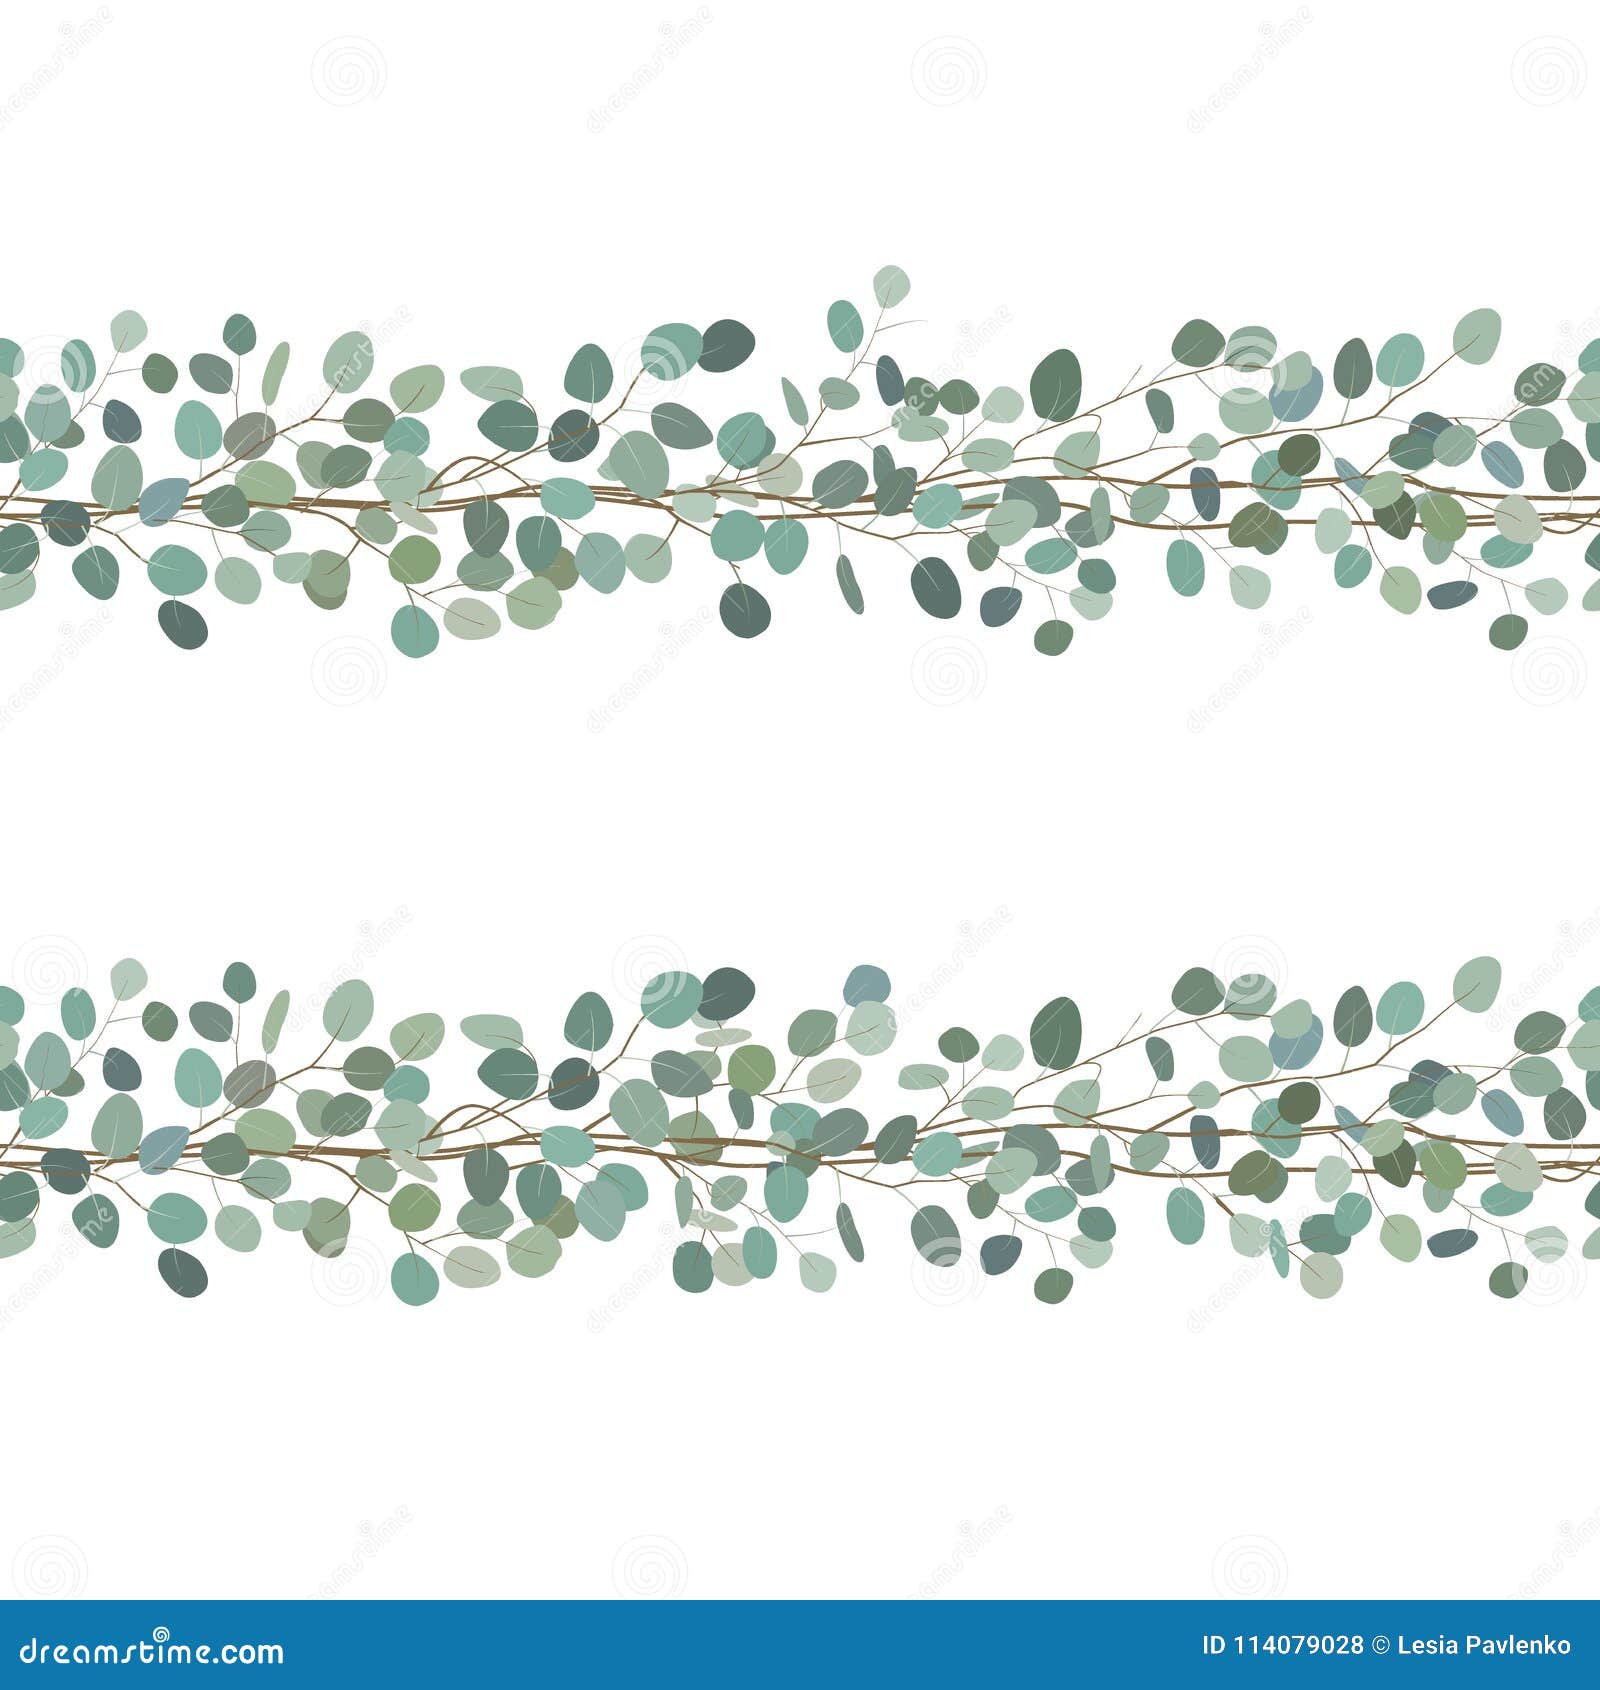 Download Elegant Seamless Borders Of Eucalyptus Branches. Floral ...